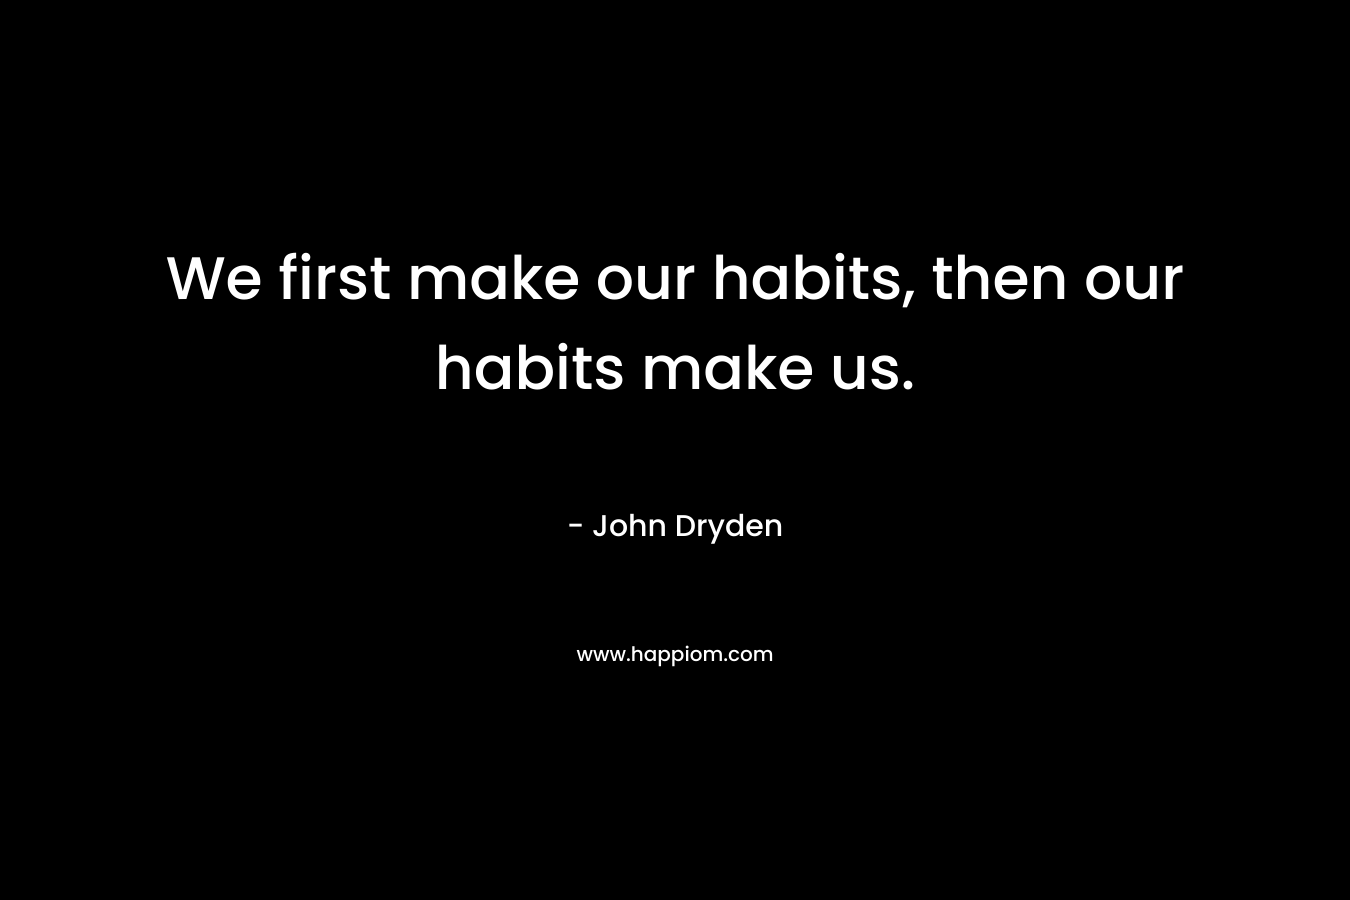 We first make our habits, then our habits make us.